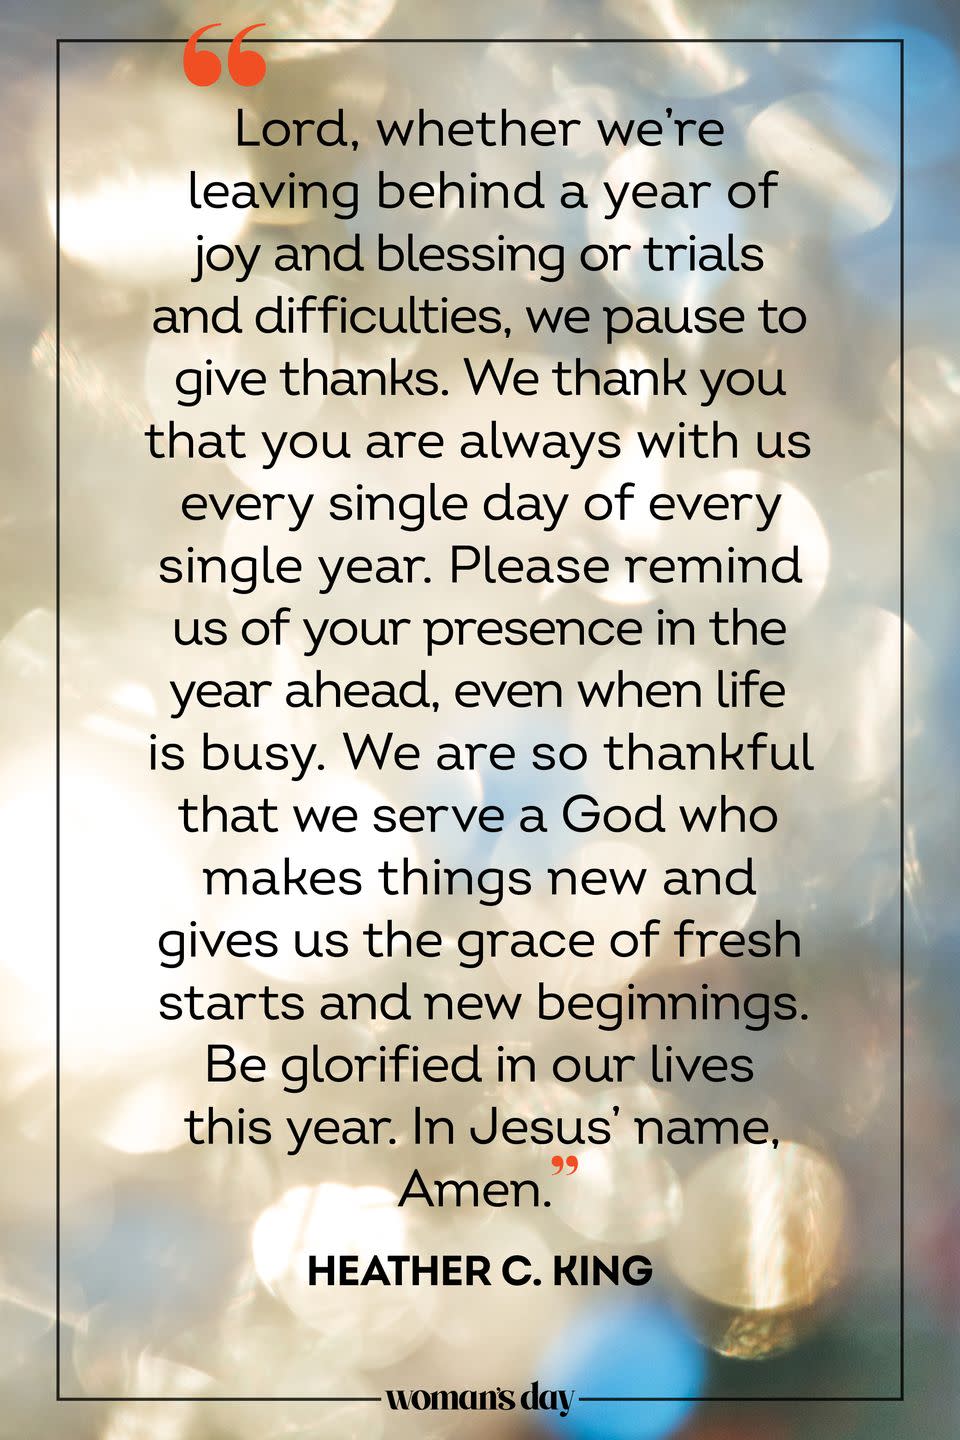 new year's blessings heather c king